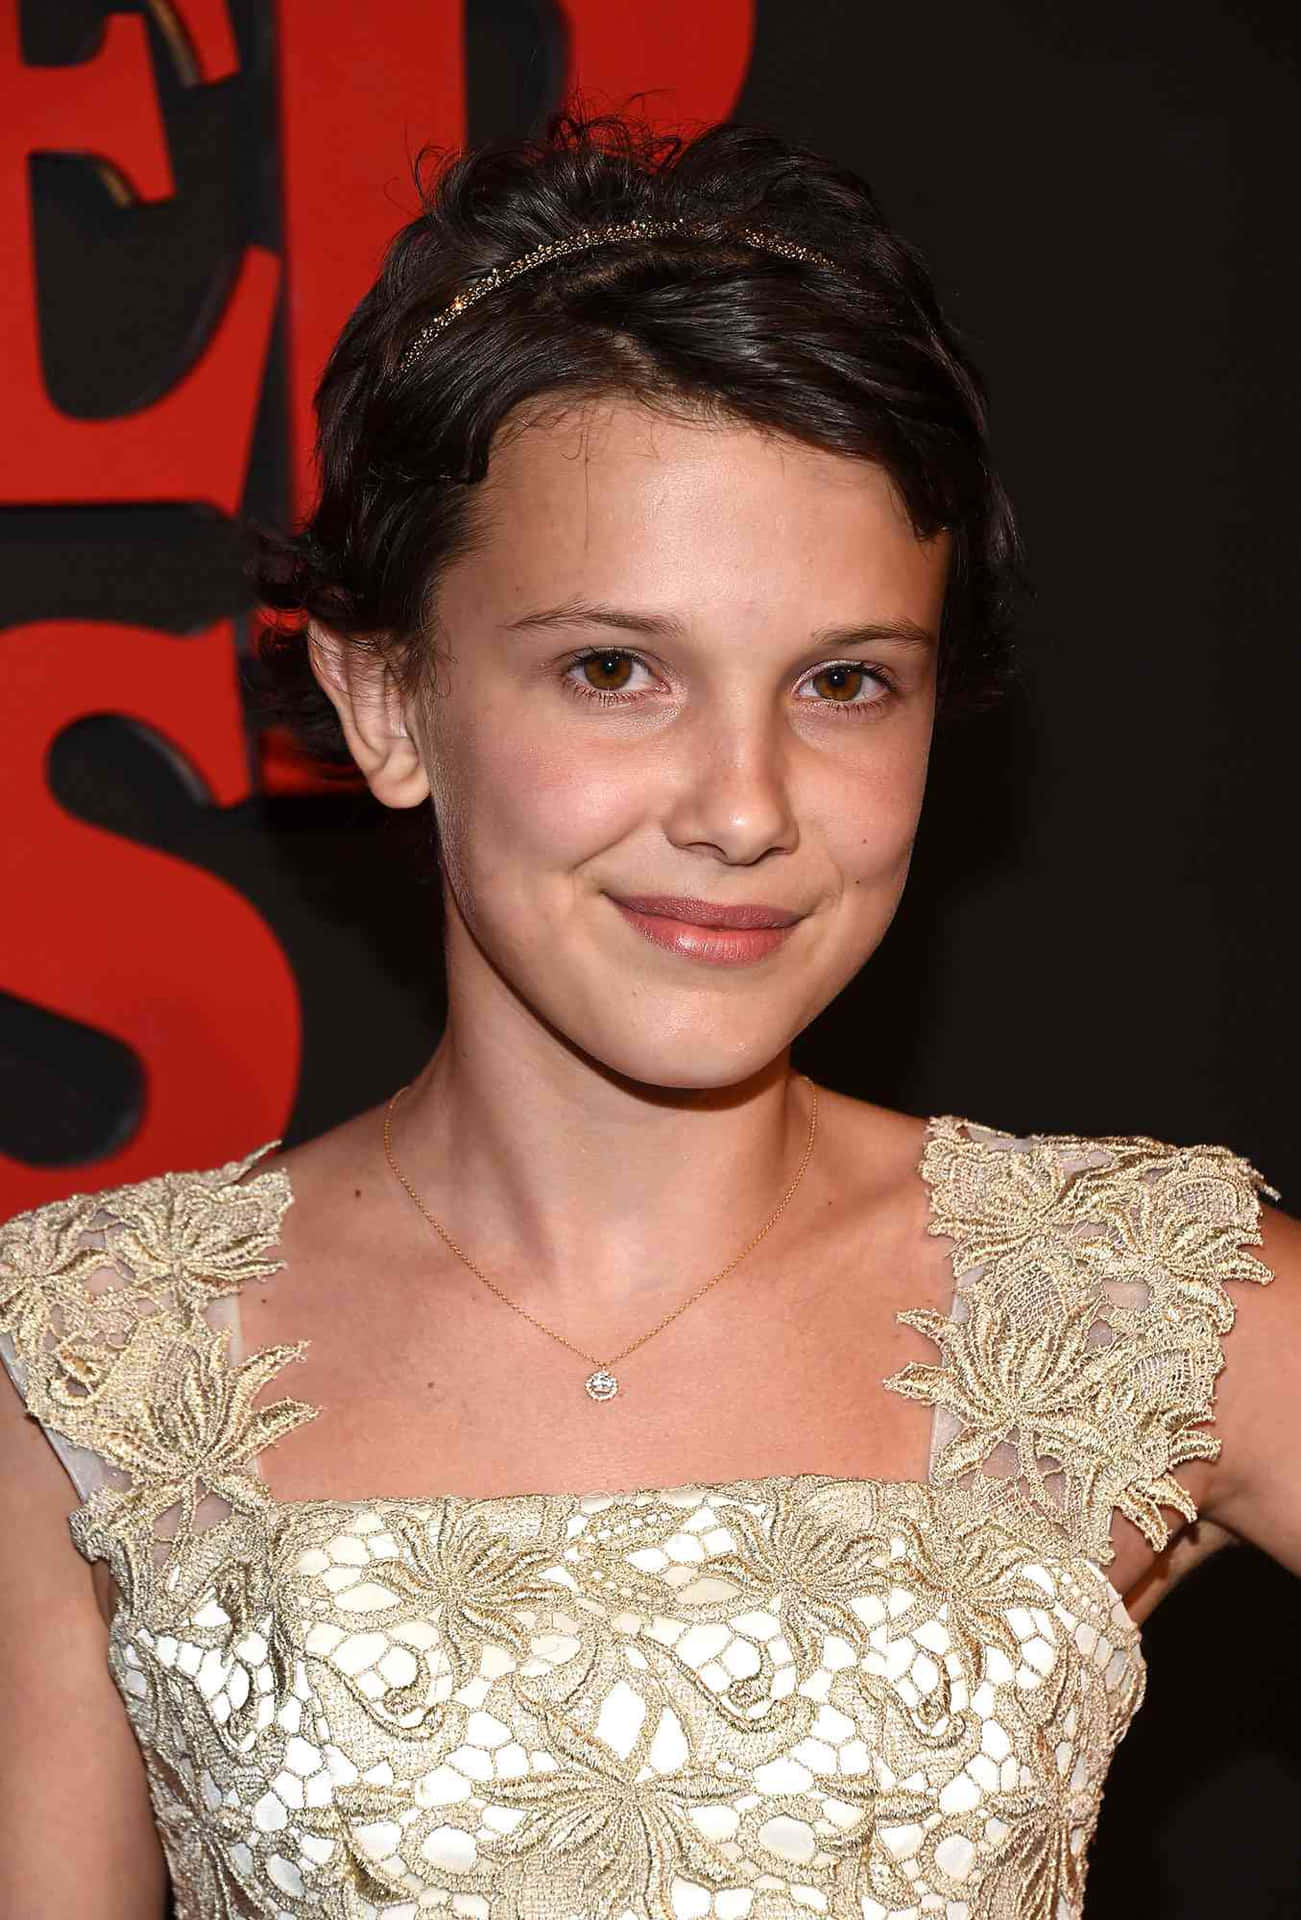 Actress Millie Bobby Brown stands out amongst the stars